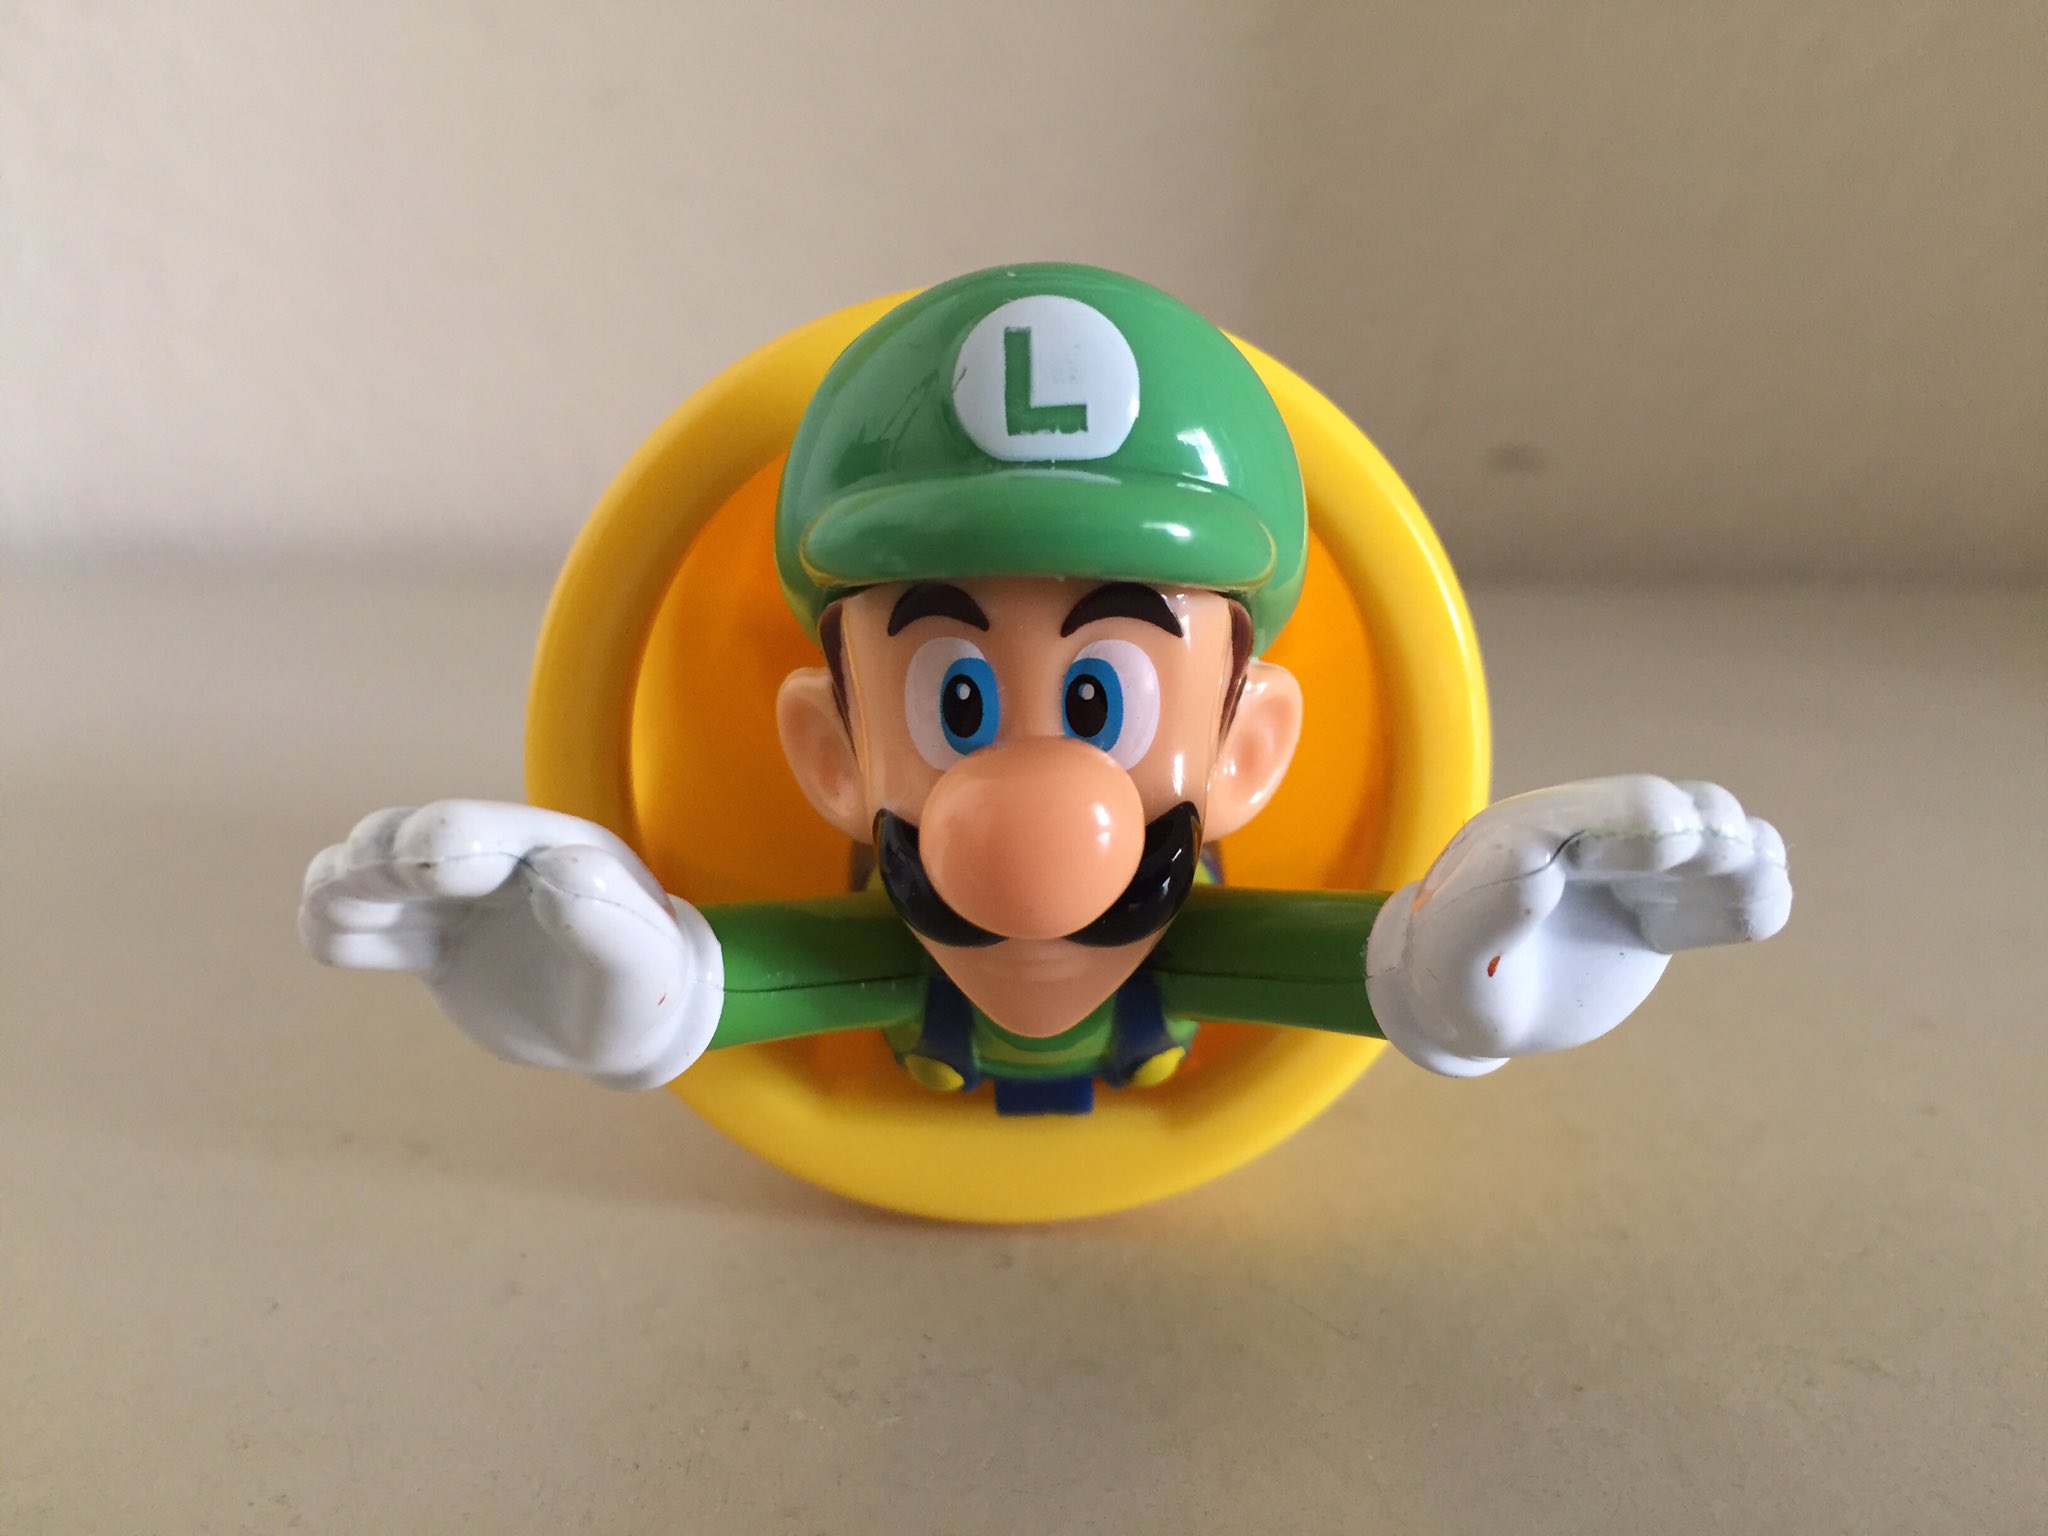 Details about   McDonald's Happy Meal Toy Super Mario Luigi Launcher #3 New Ships Free!